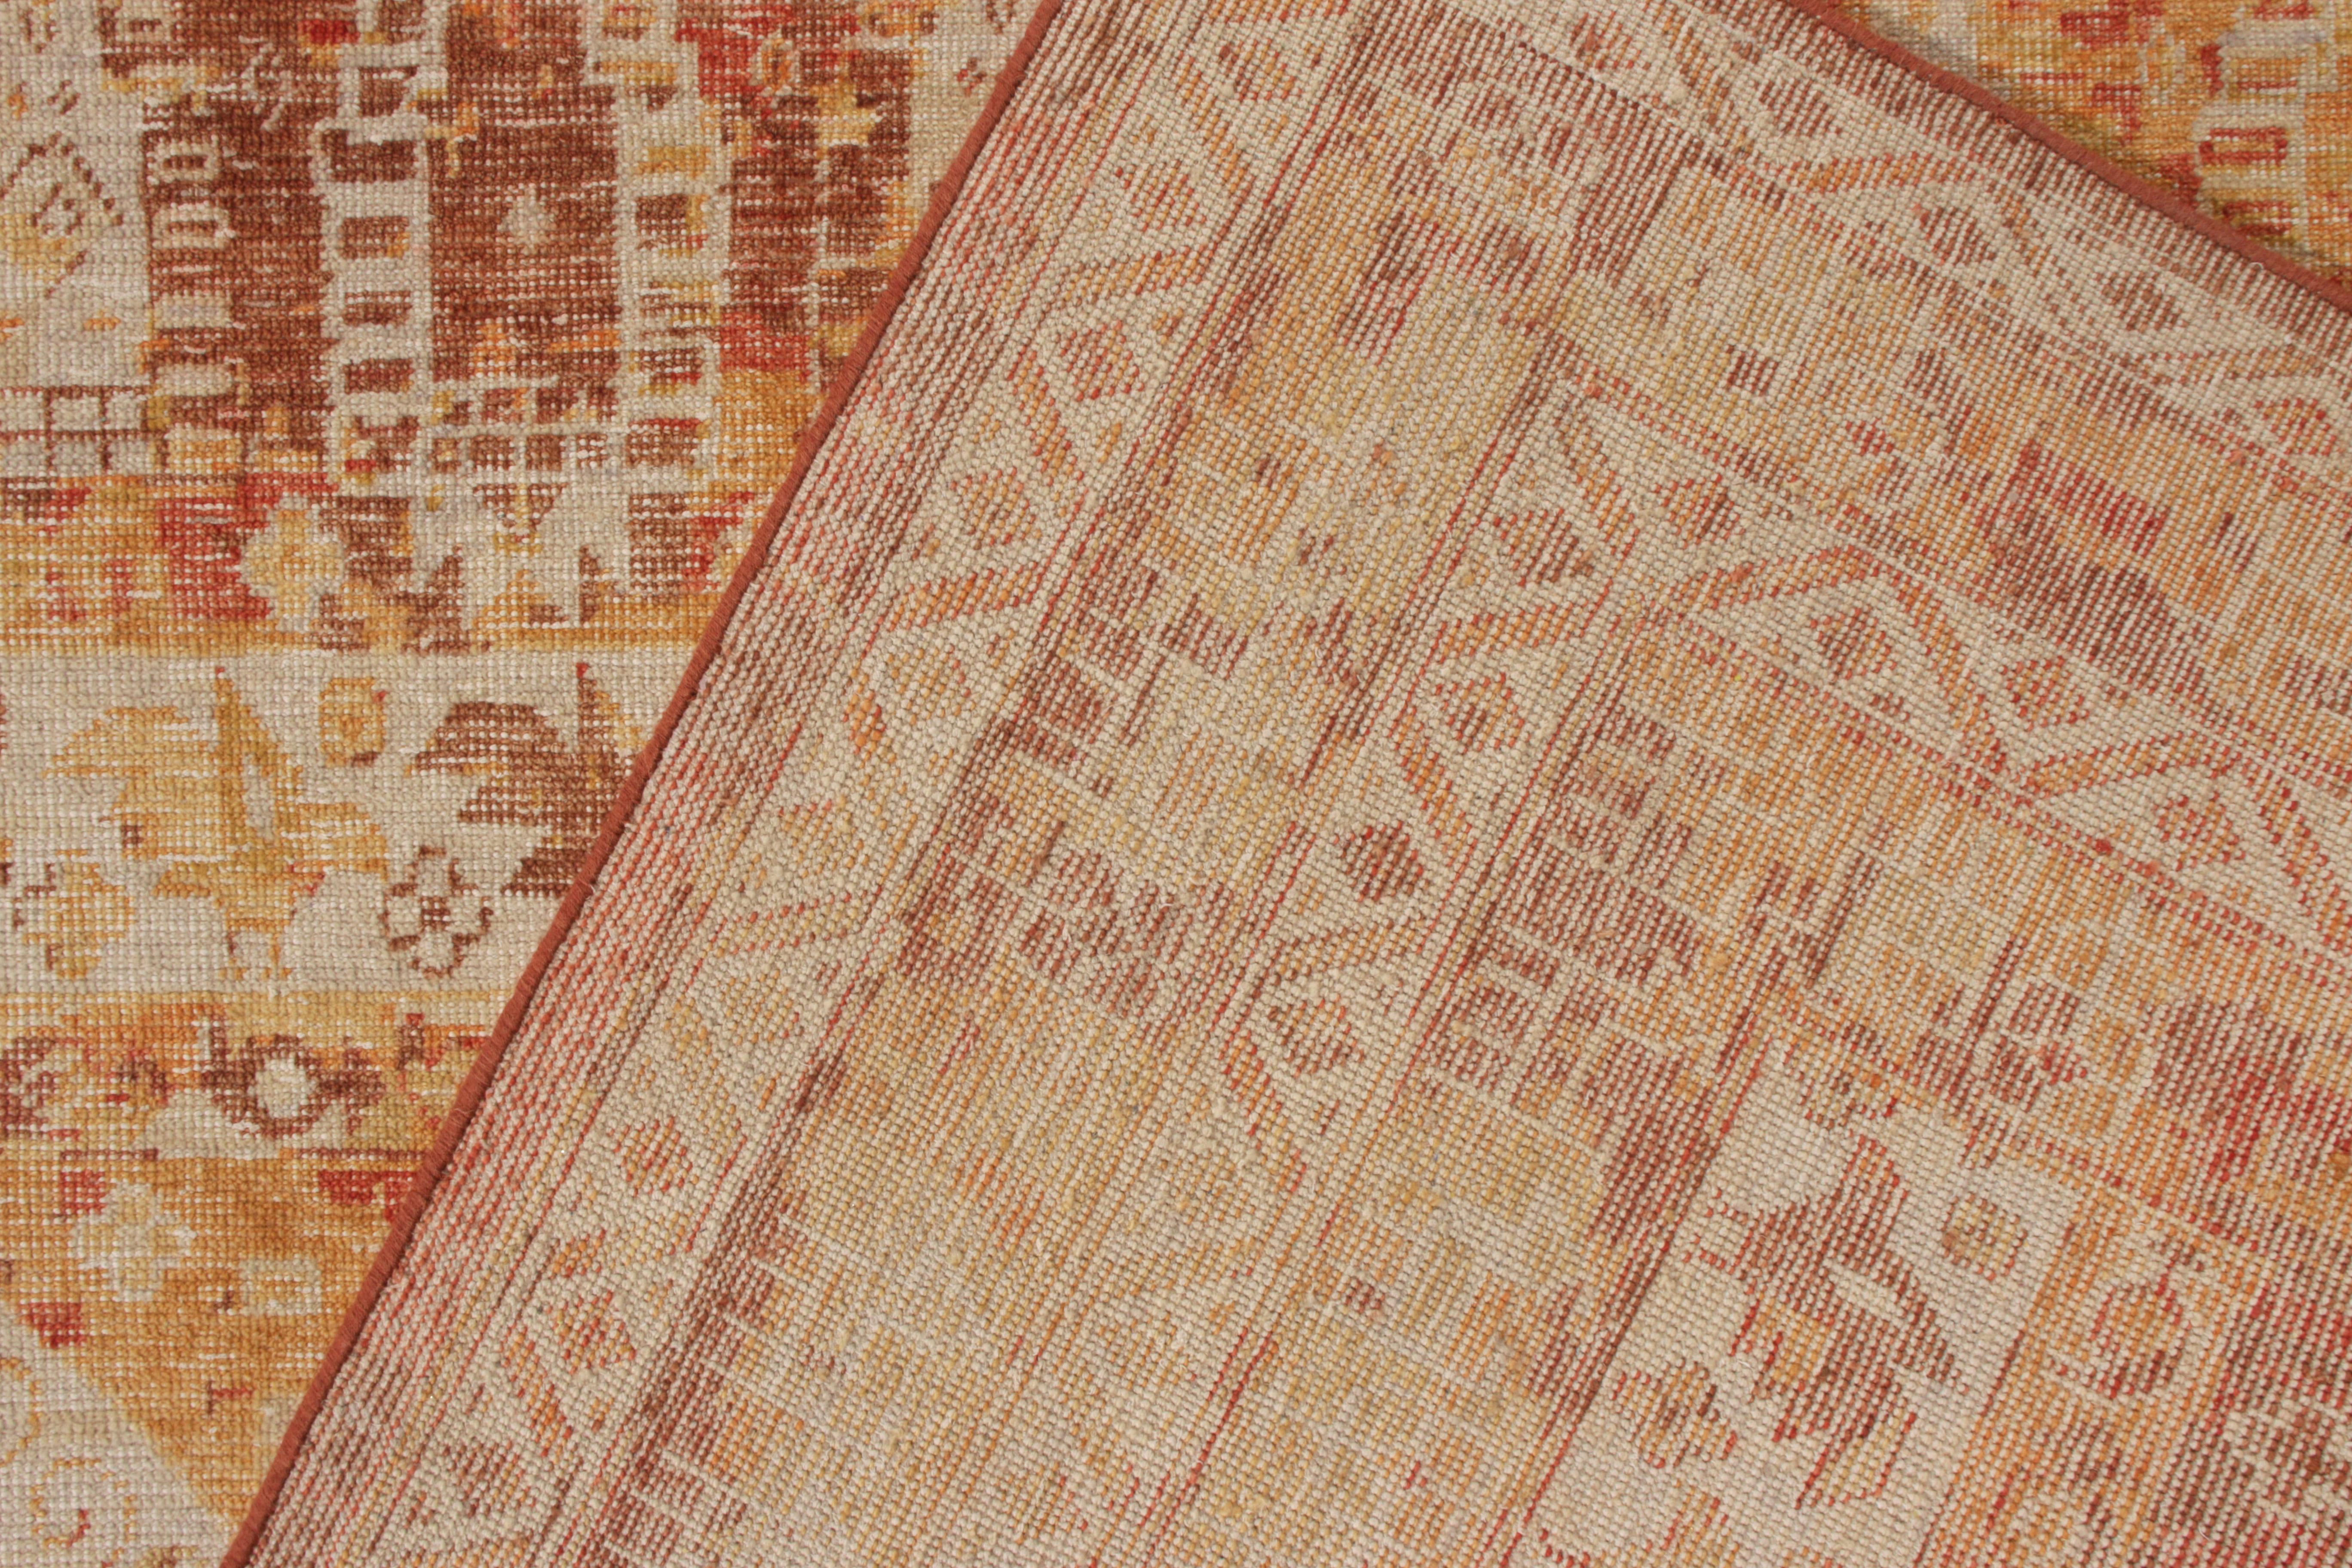 Rug & Kilim’s Distressed Tribal Style Rug in Orange-Red, Beige Geometric Pattern In New Condition For Sale In Long Island City, NY